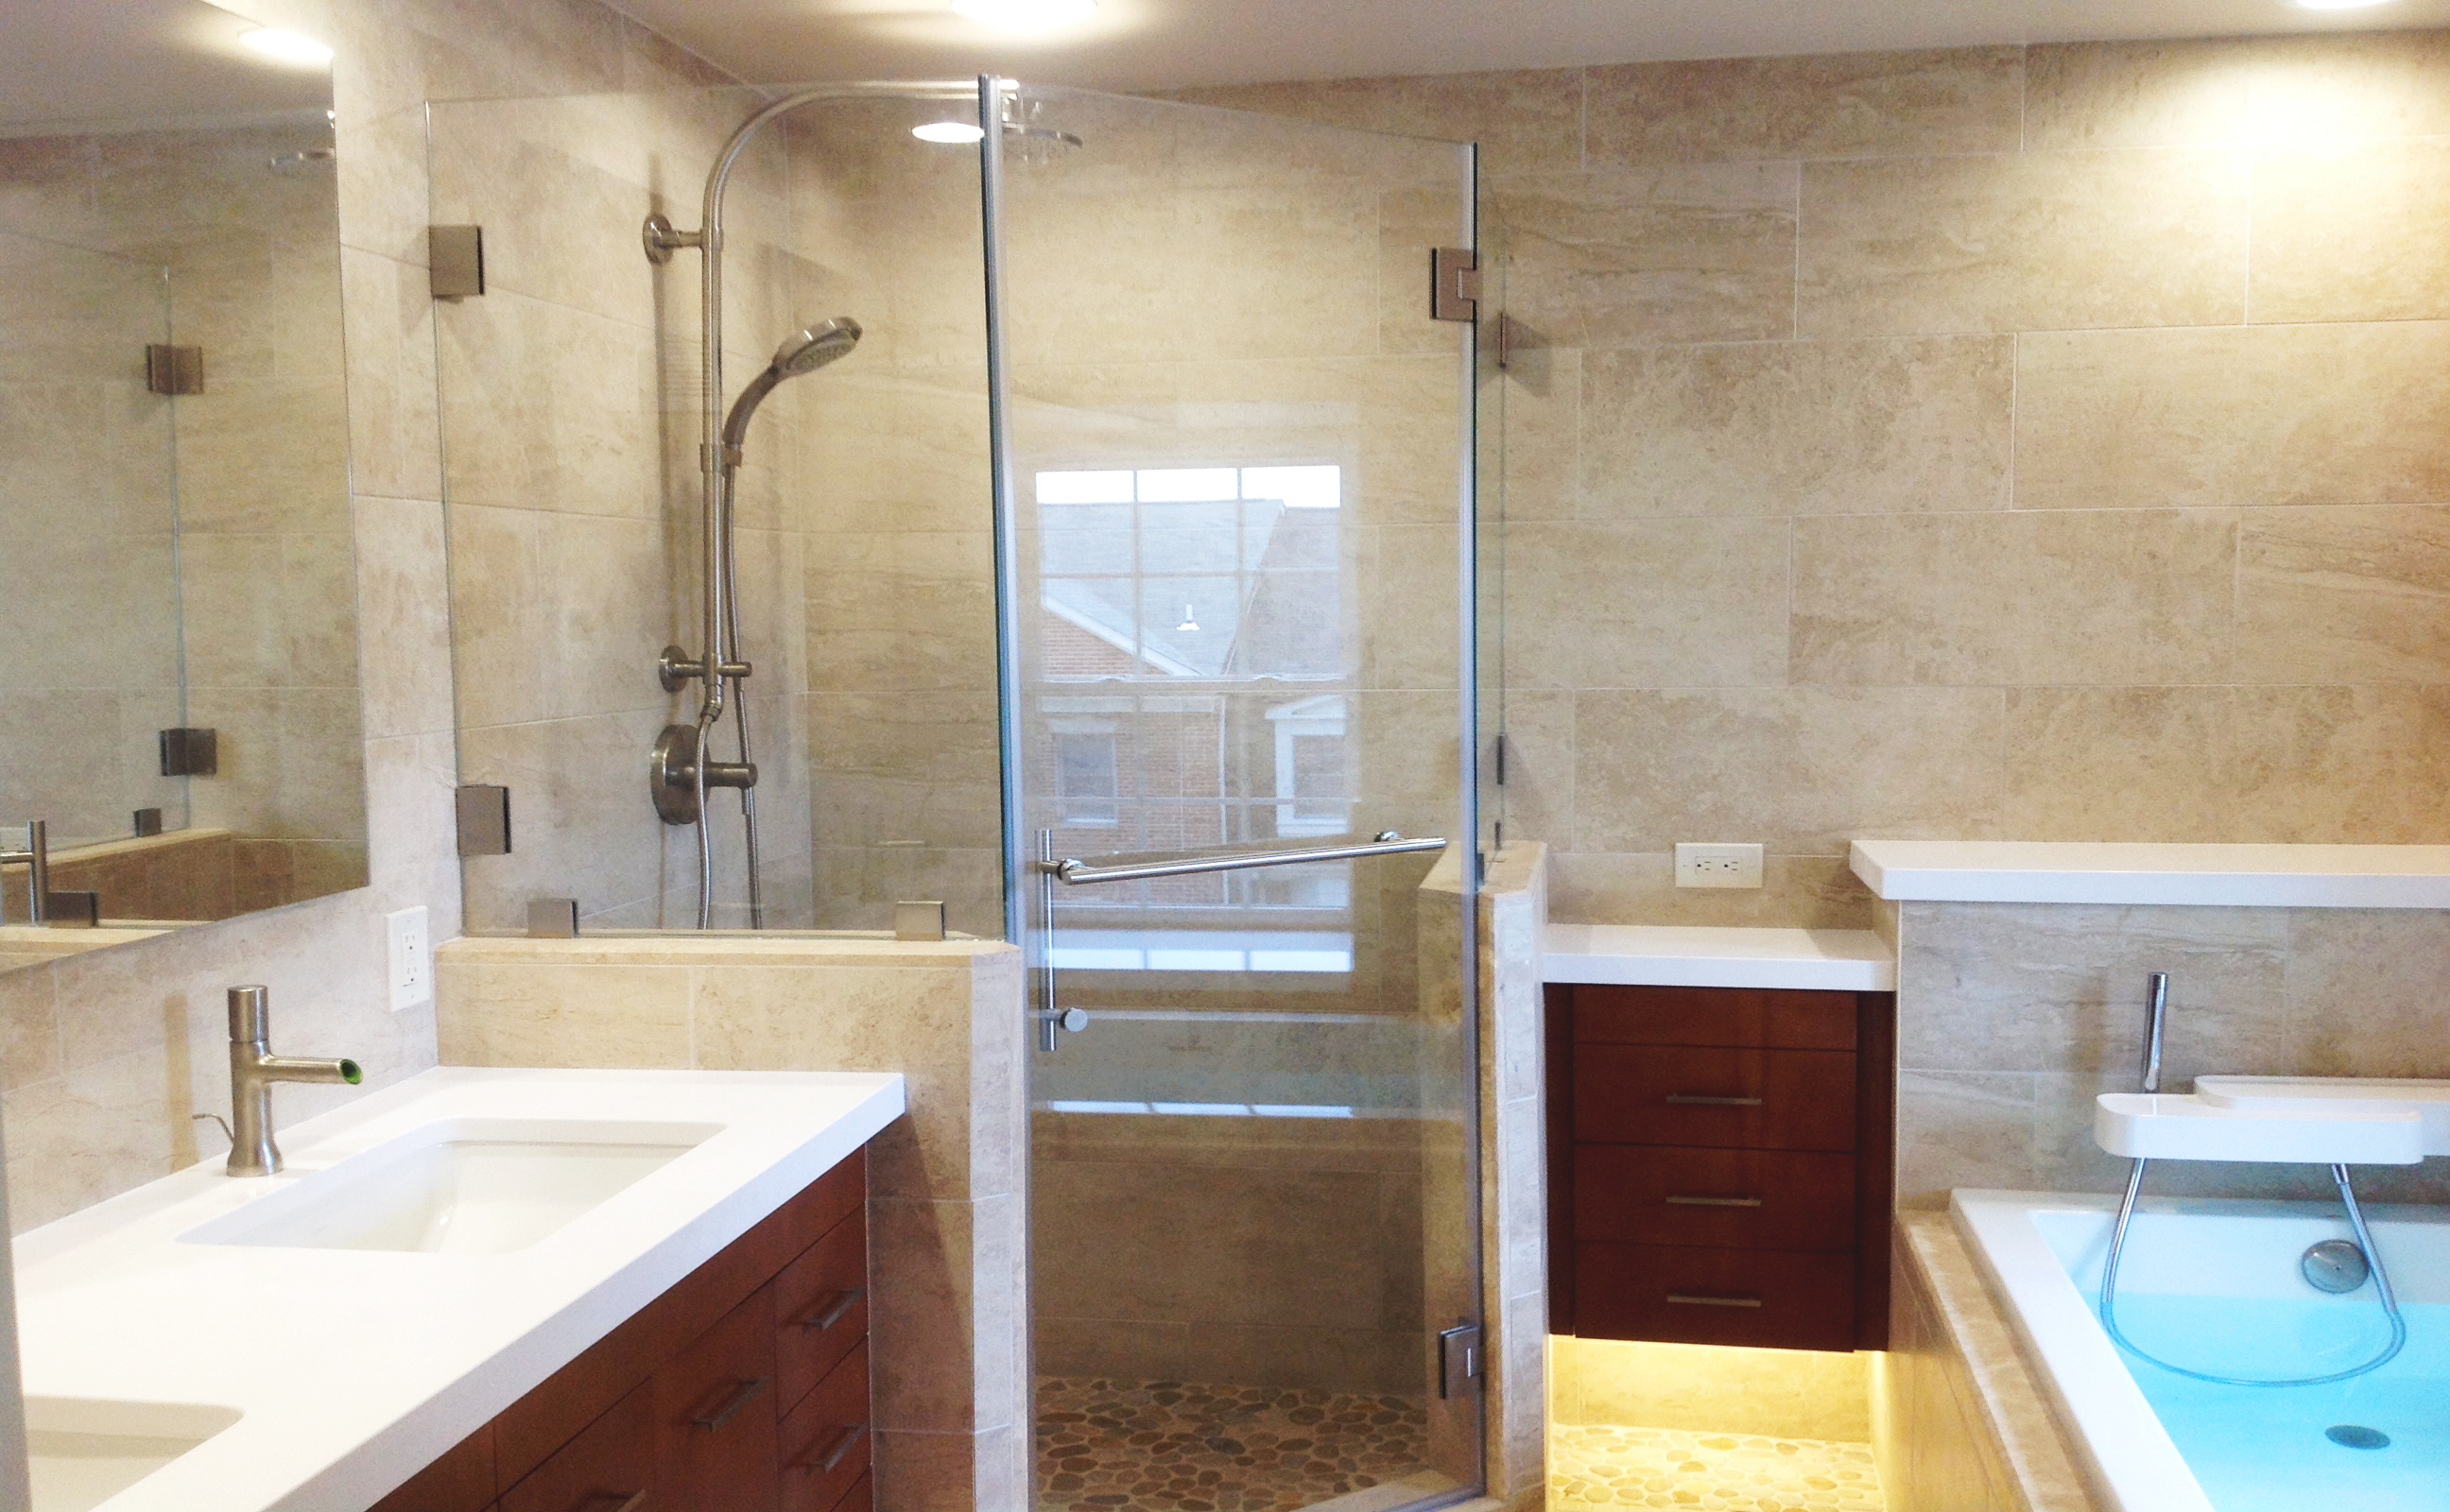 How to Remodel a Bathroom Start to Finish